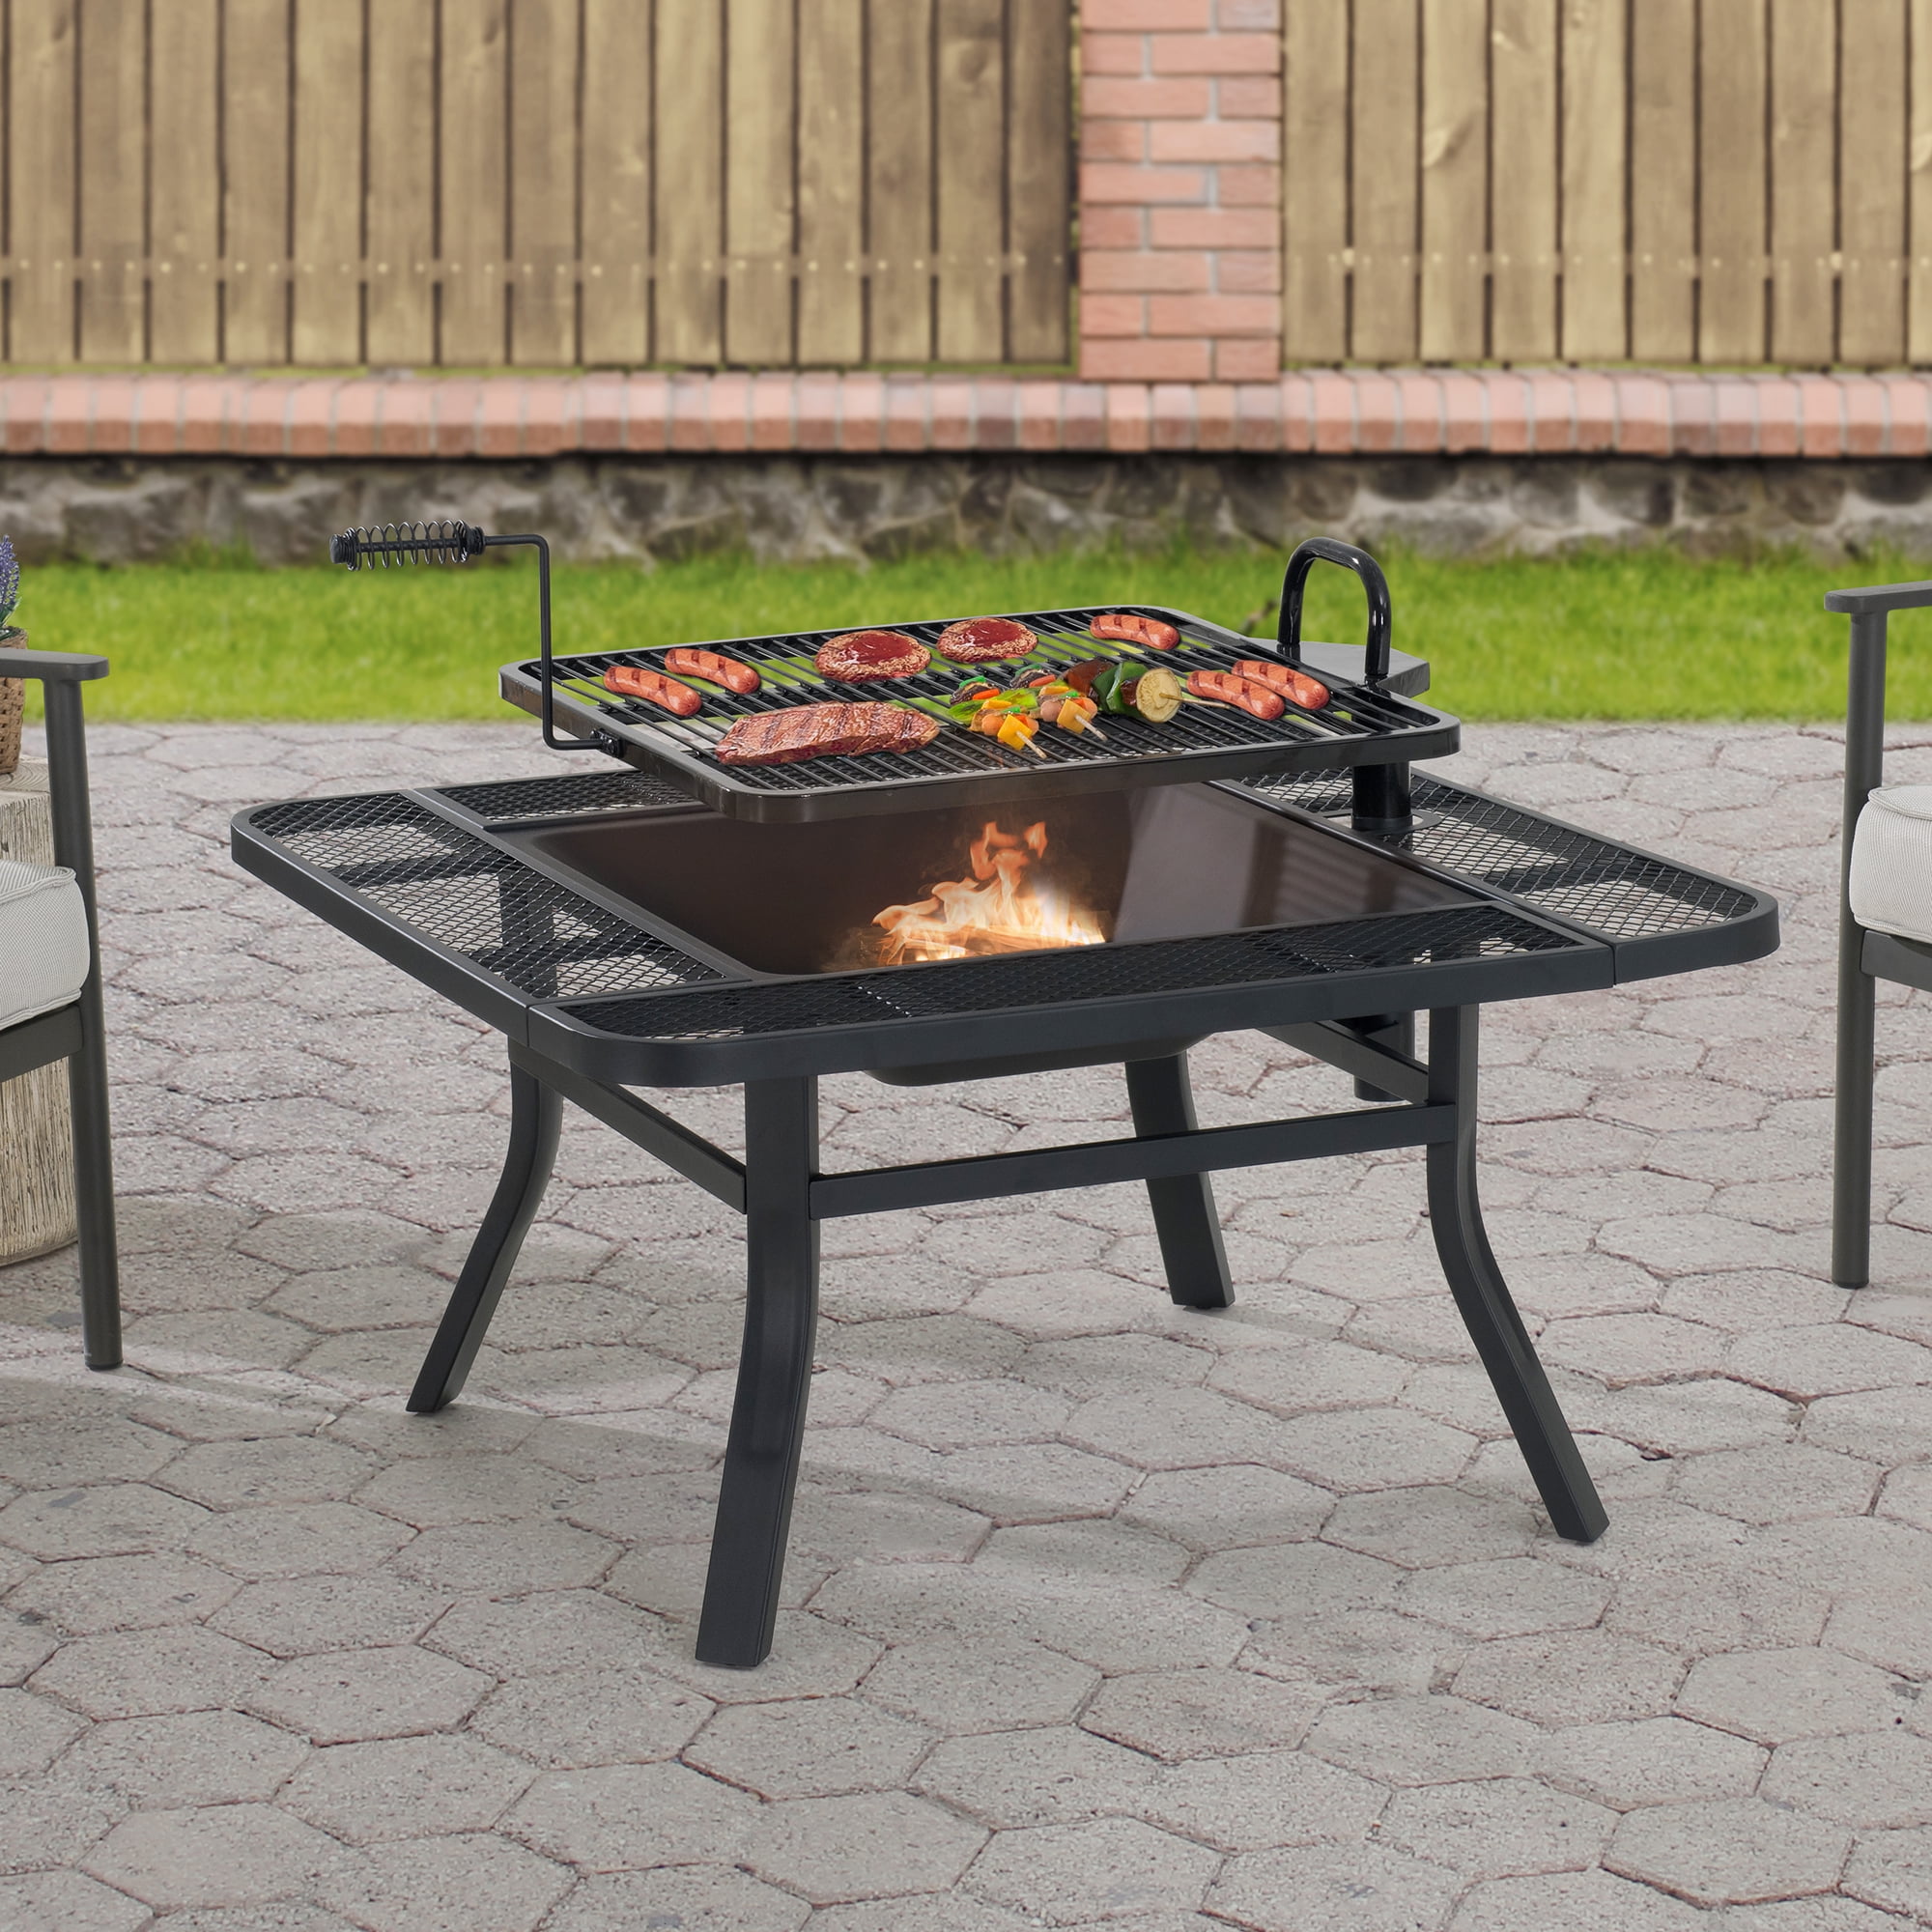 Overhale dræbe Brink Sunjoy 38 Inch Grill Fire Pit for Outside, Outdoor Wood Burning Firepit  with Adjustable Grill Grate and Fire Poker, BBQ Fire Pit table for Patio  and Backyard - Walmart.com